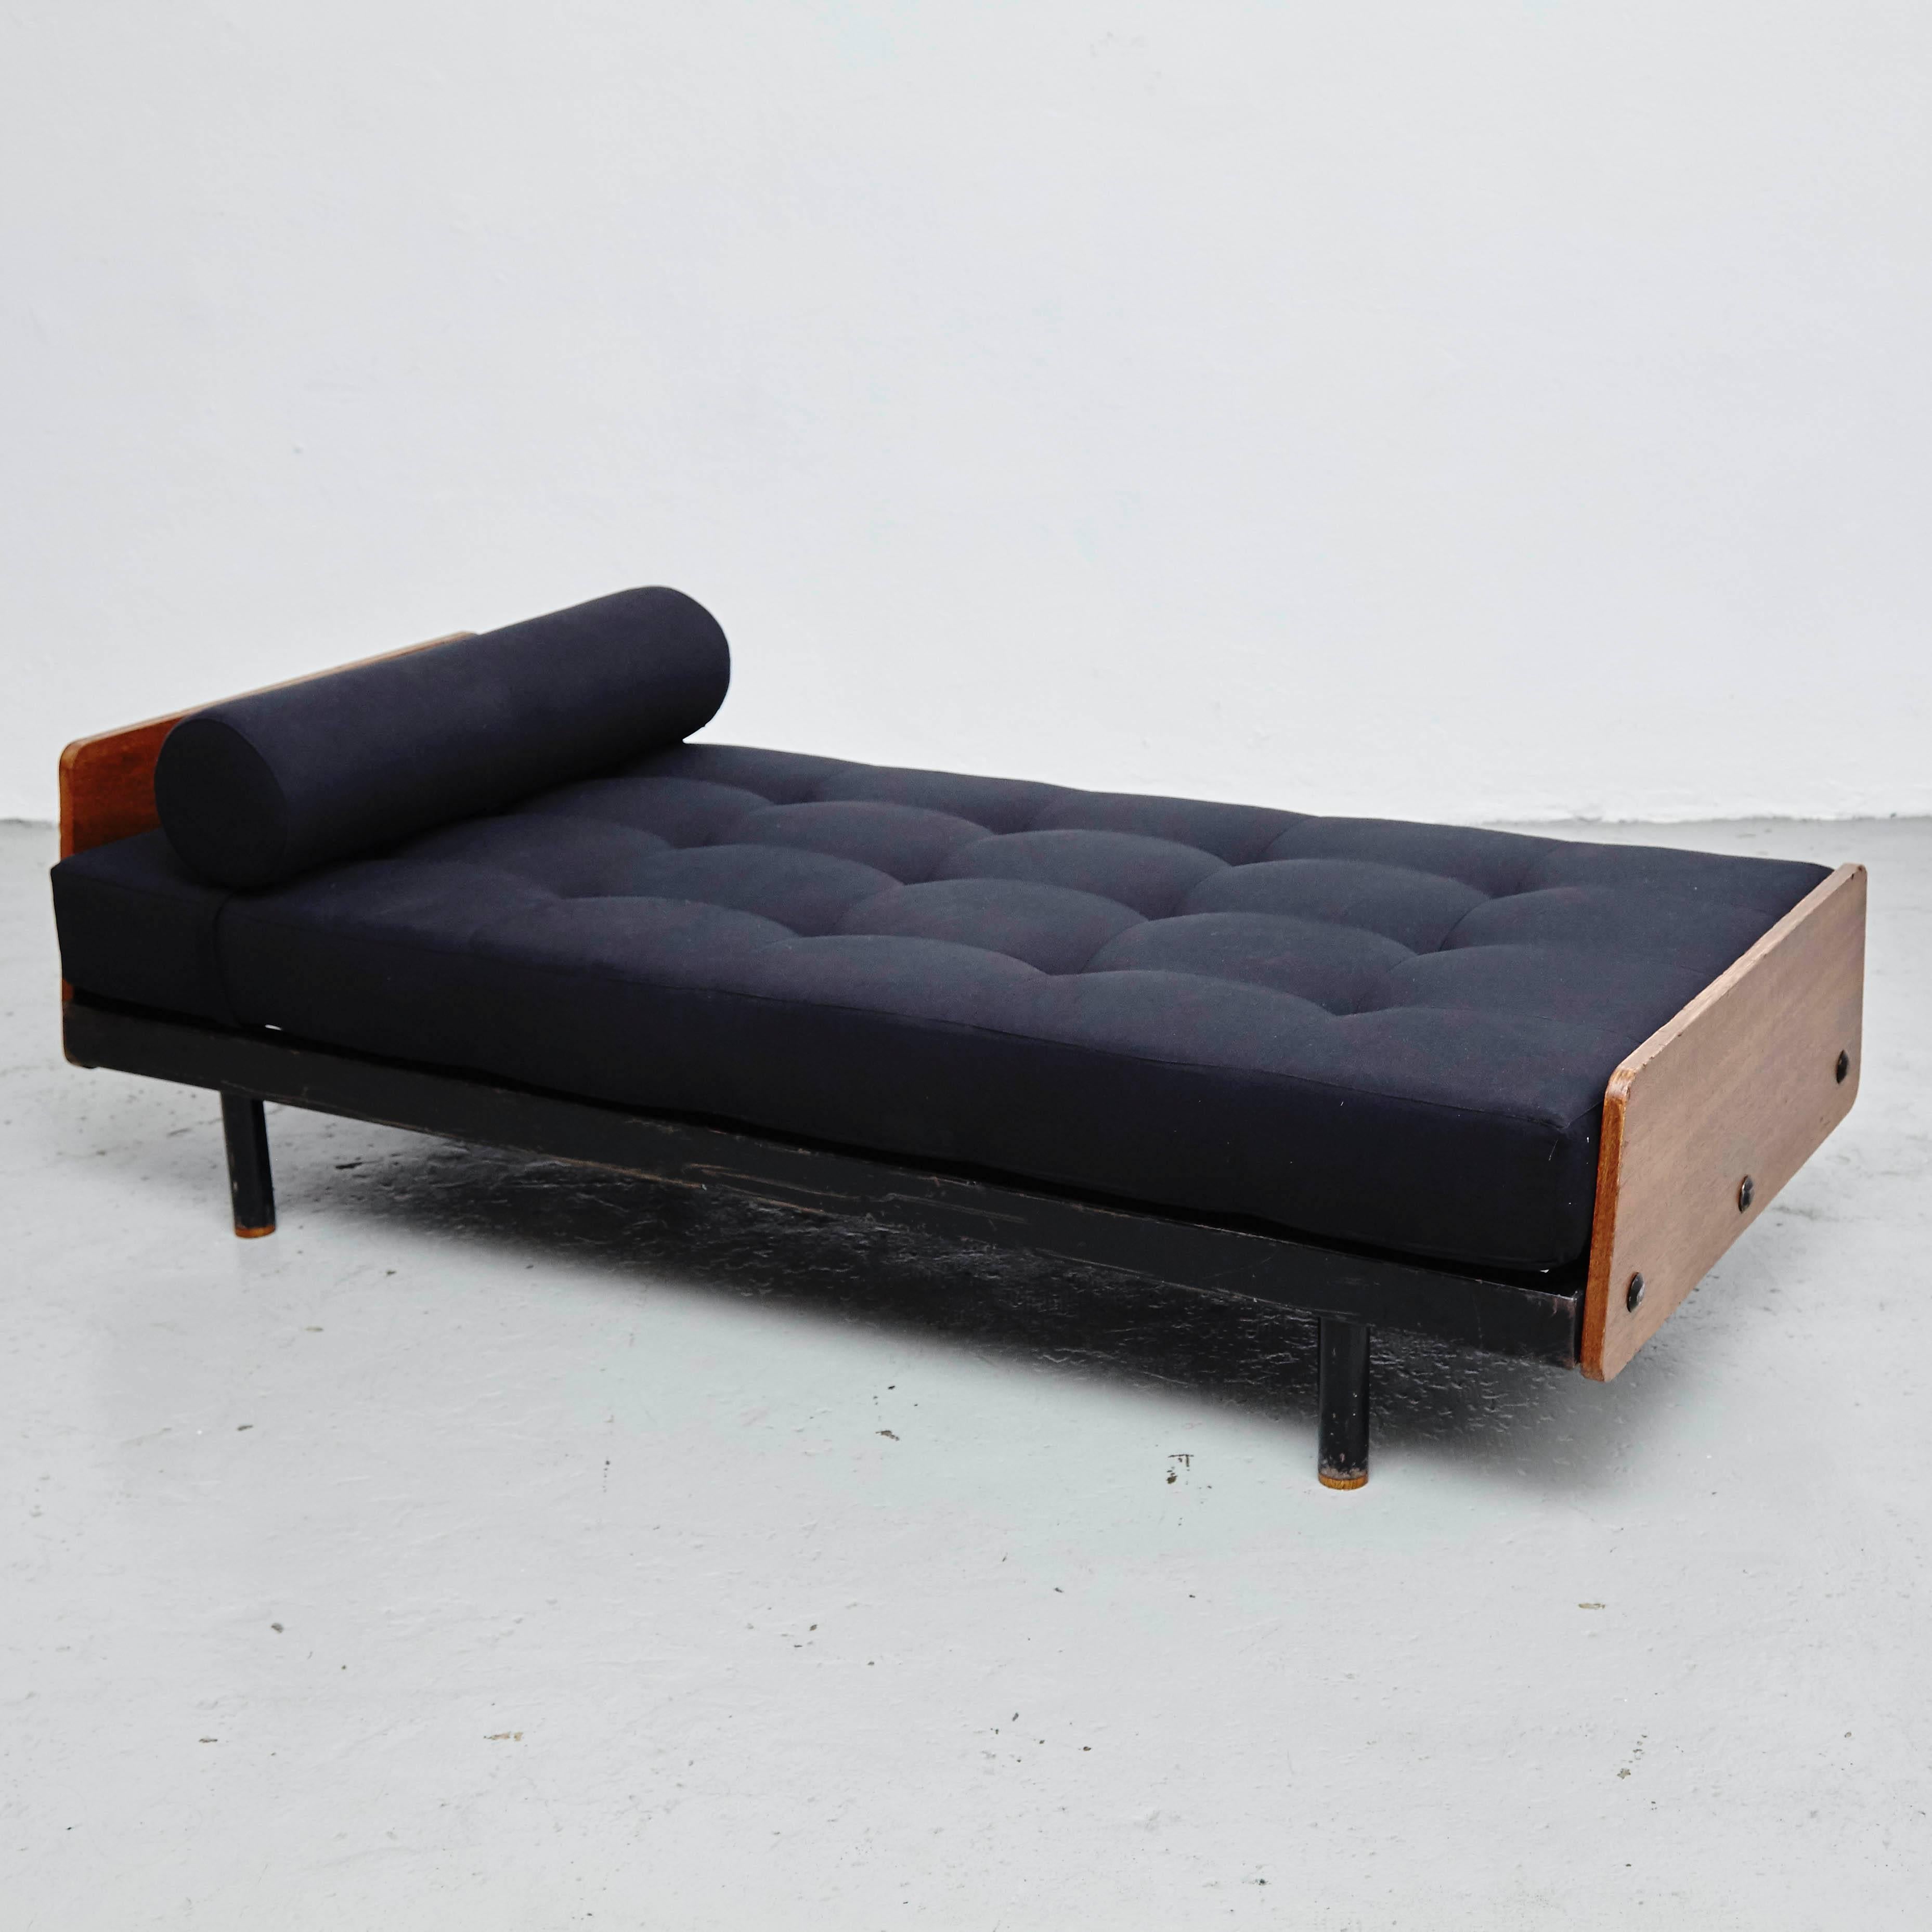 Mid-20th Century Jean Prouve Daybed, circa 1950